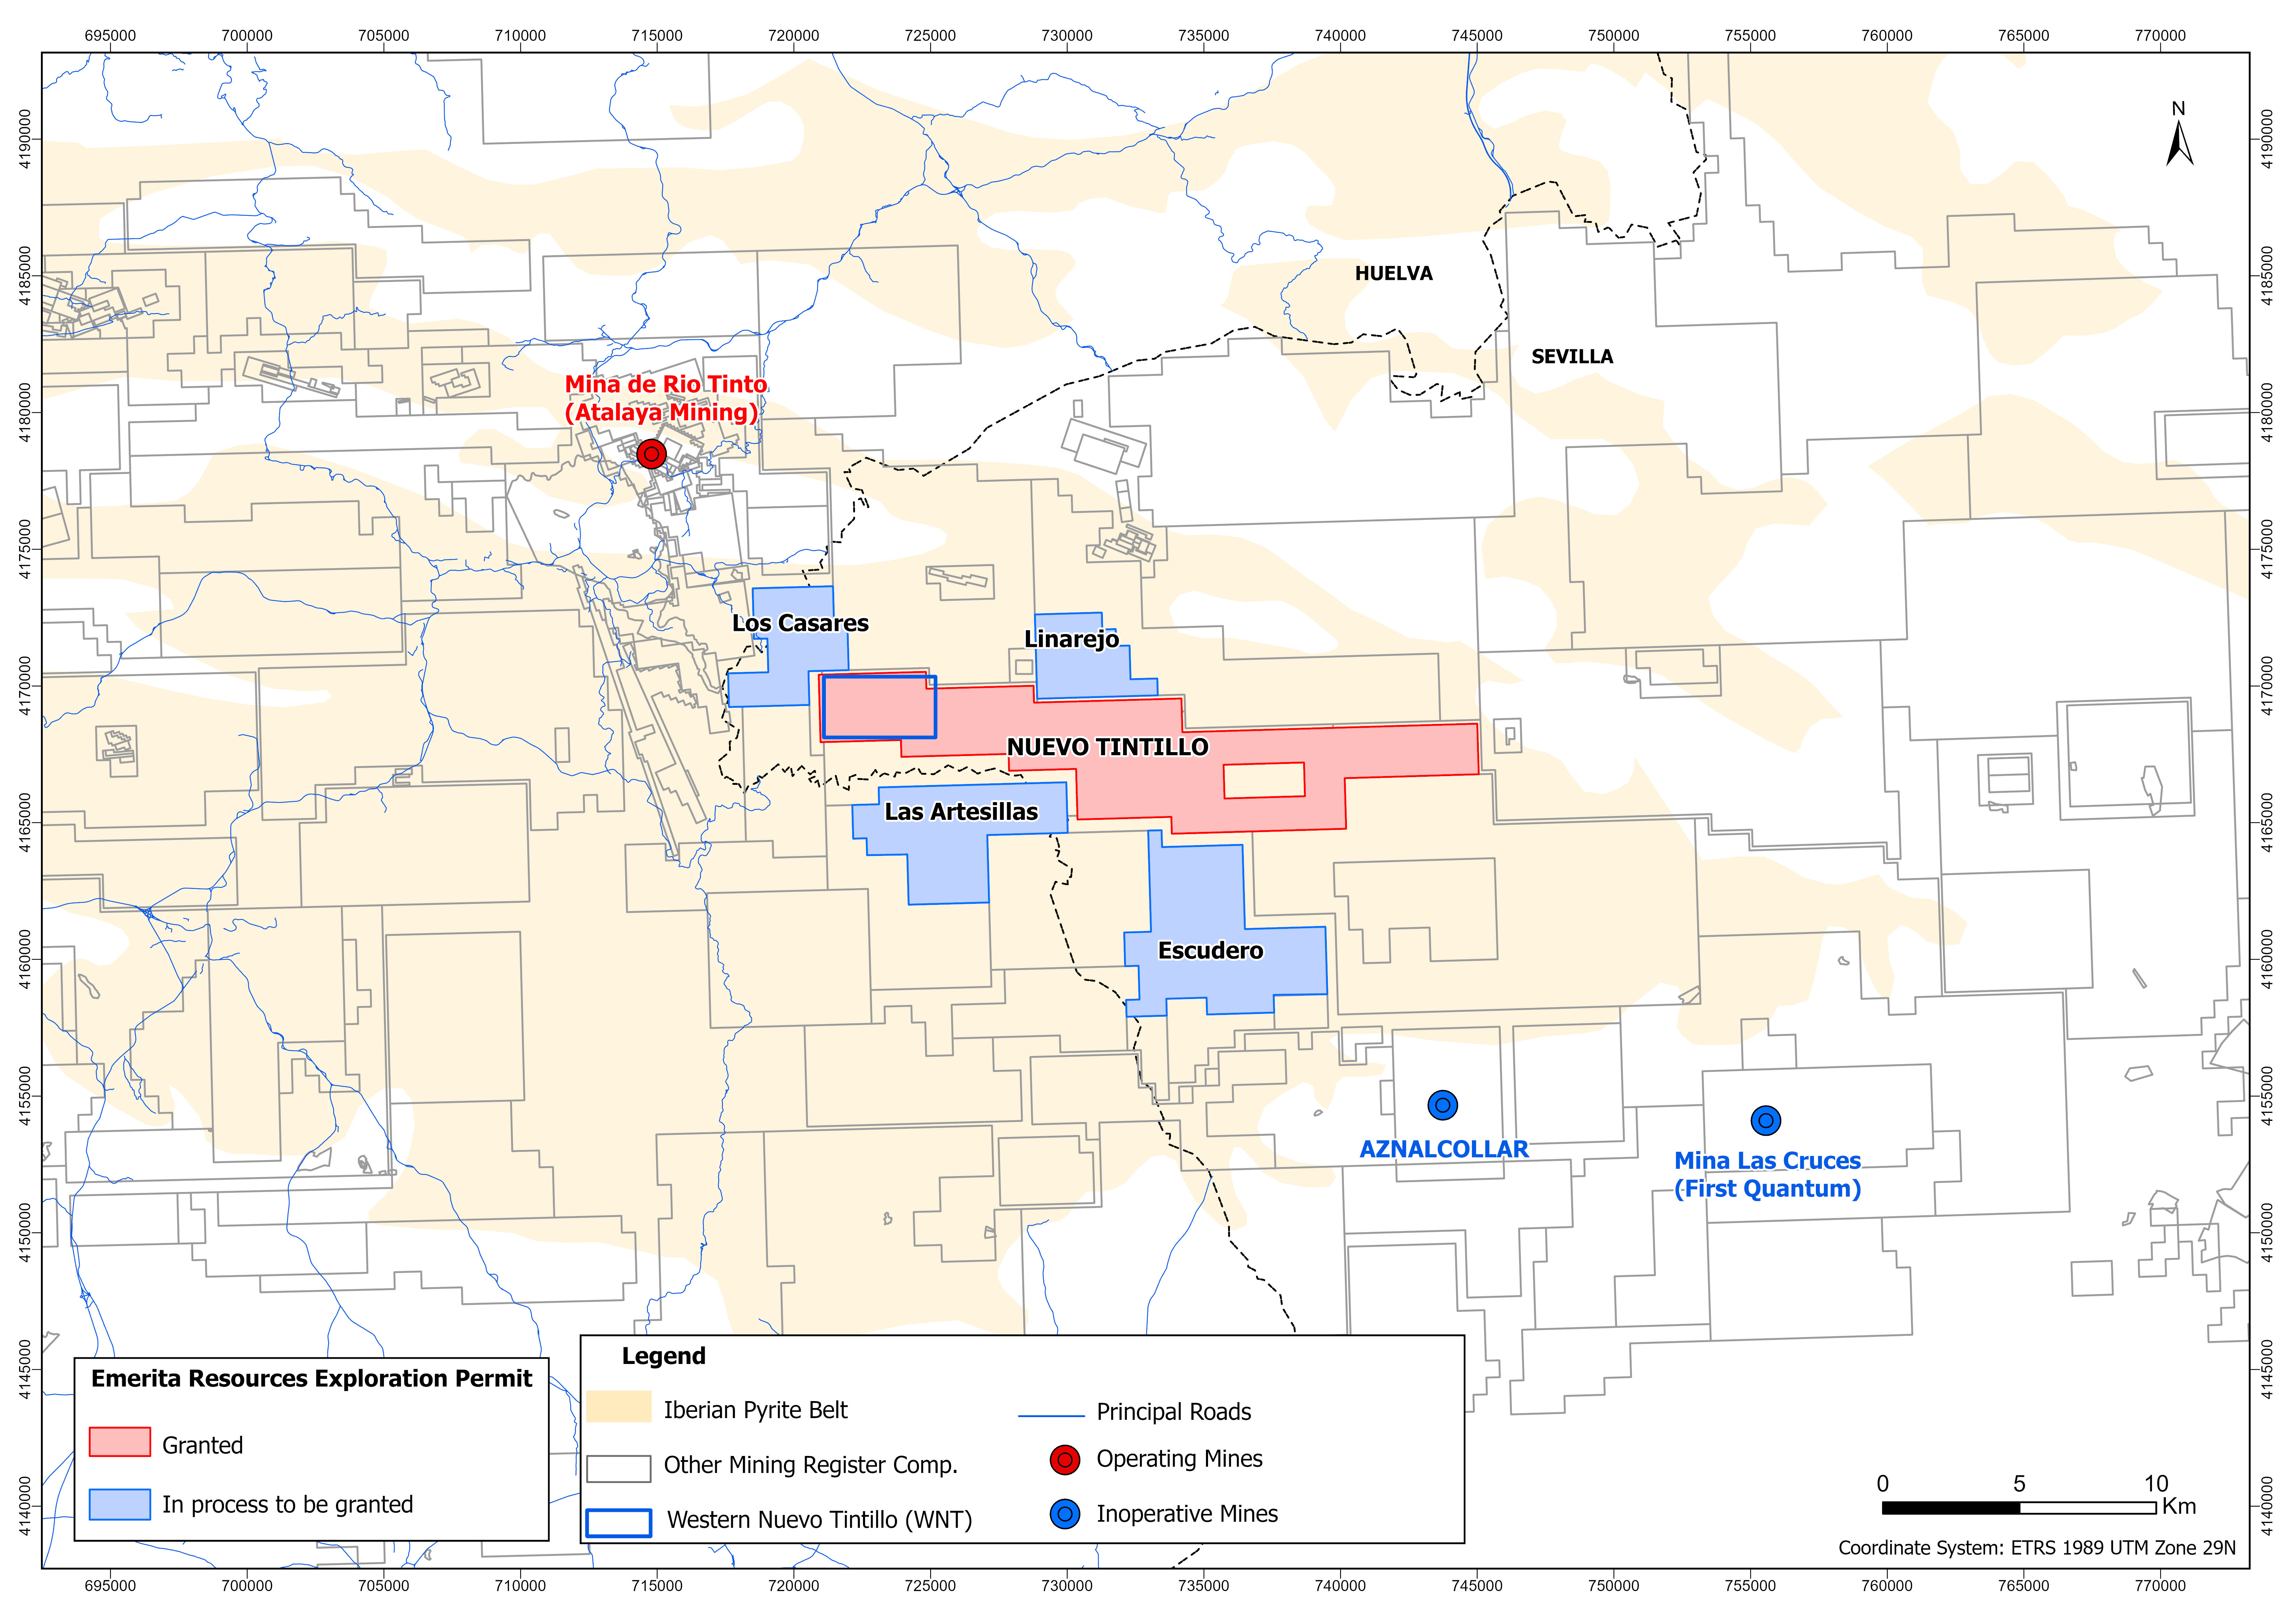 Figure 1: Location of the Nuevo Tintillo project with respect to Rio Tinto, Aznacóllar and Cobre Las Cruces deposits. Pending claims shown in blue.